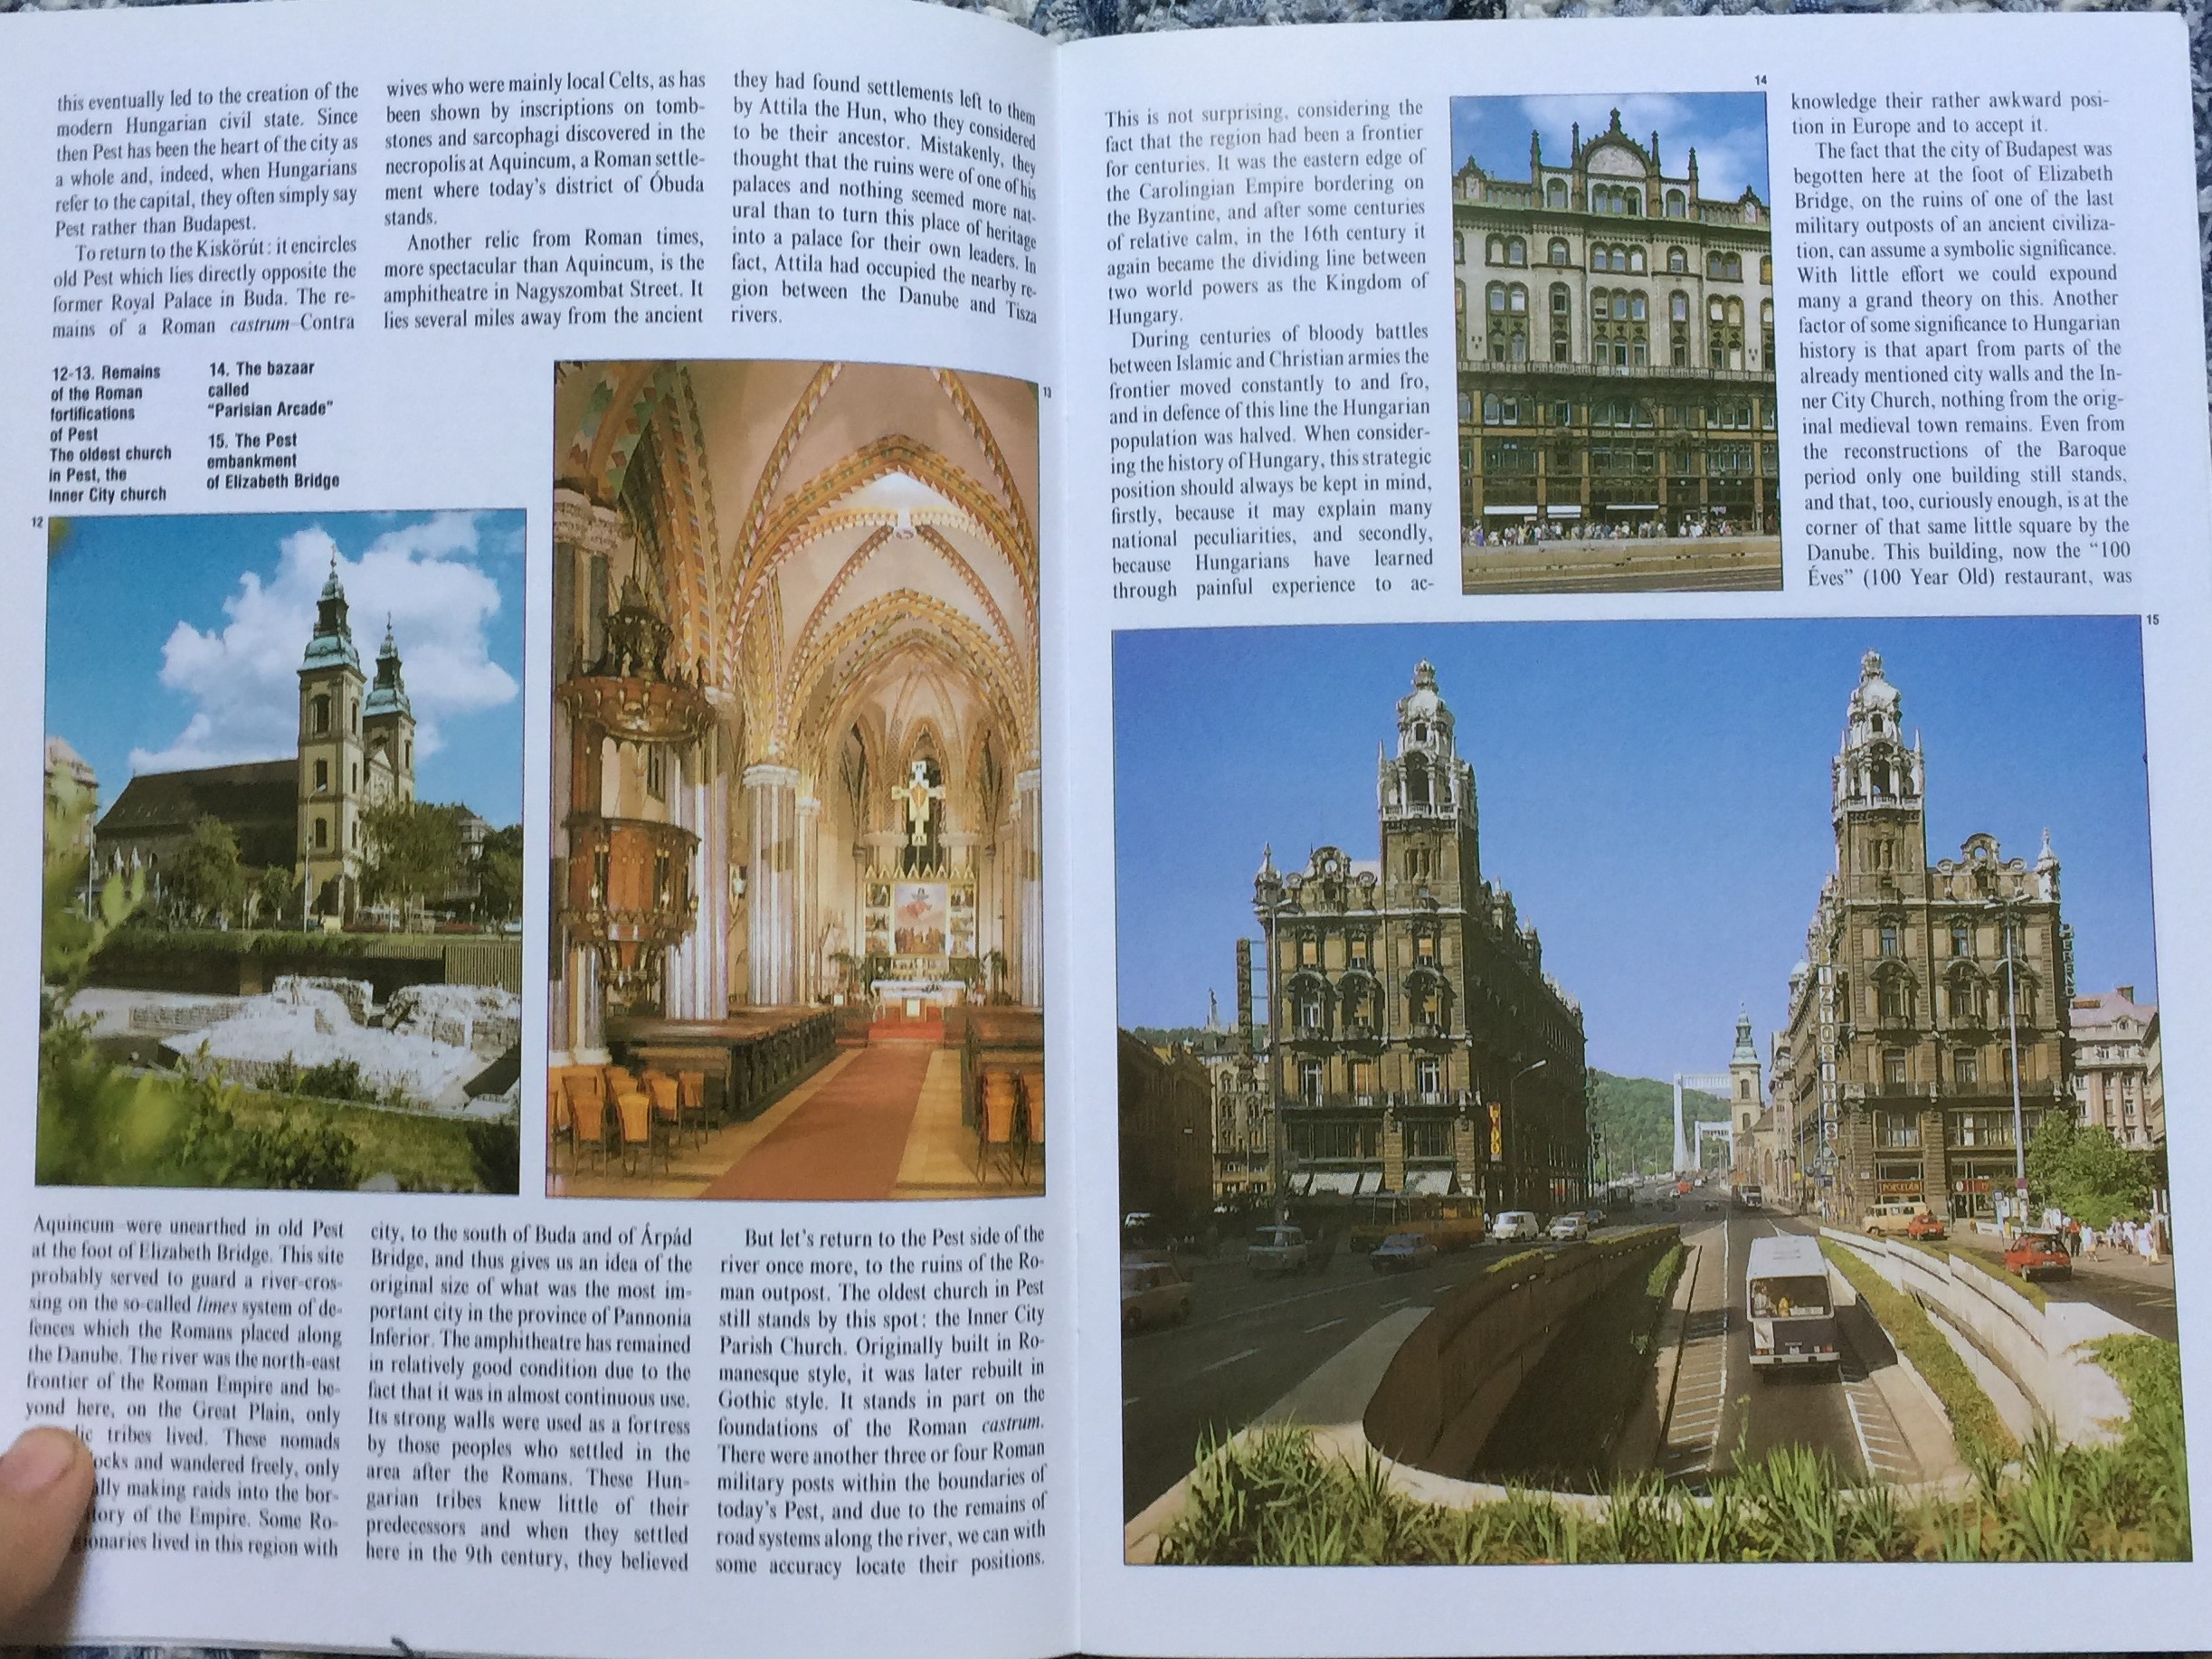 budapest-a-city-set-in-time-english-language-city-tour-booklet-of-the-hungarian-capital-4.jpg